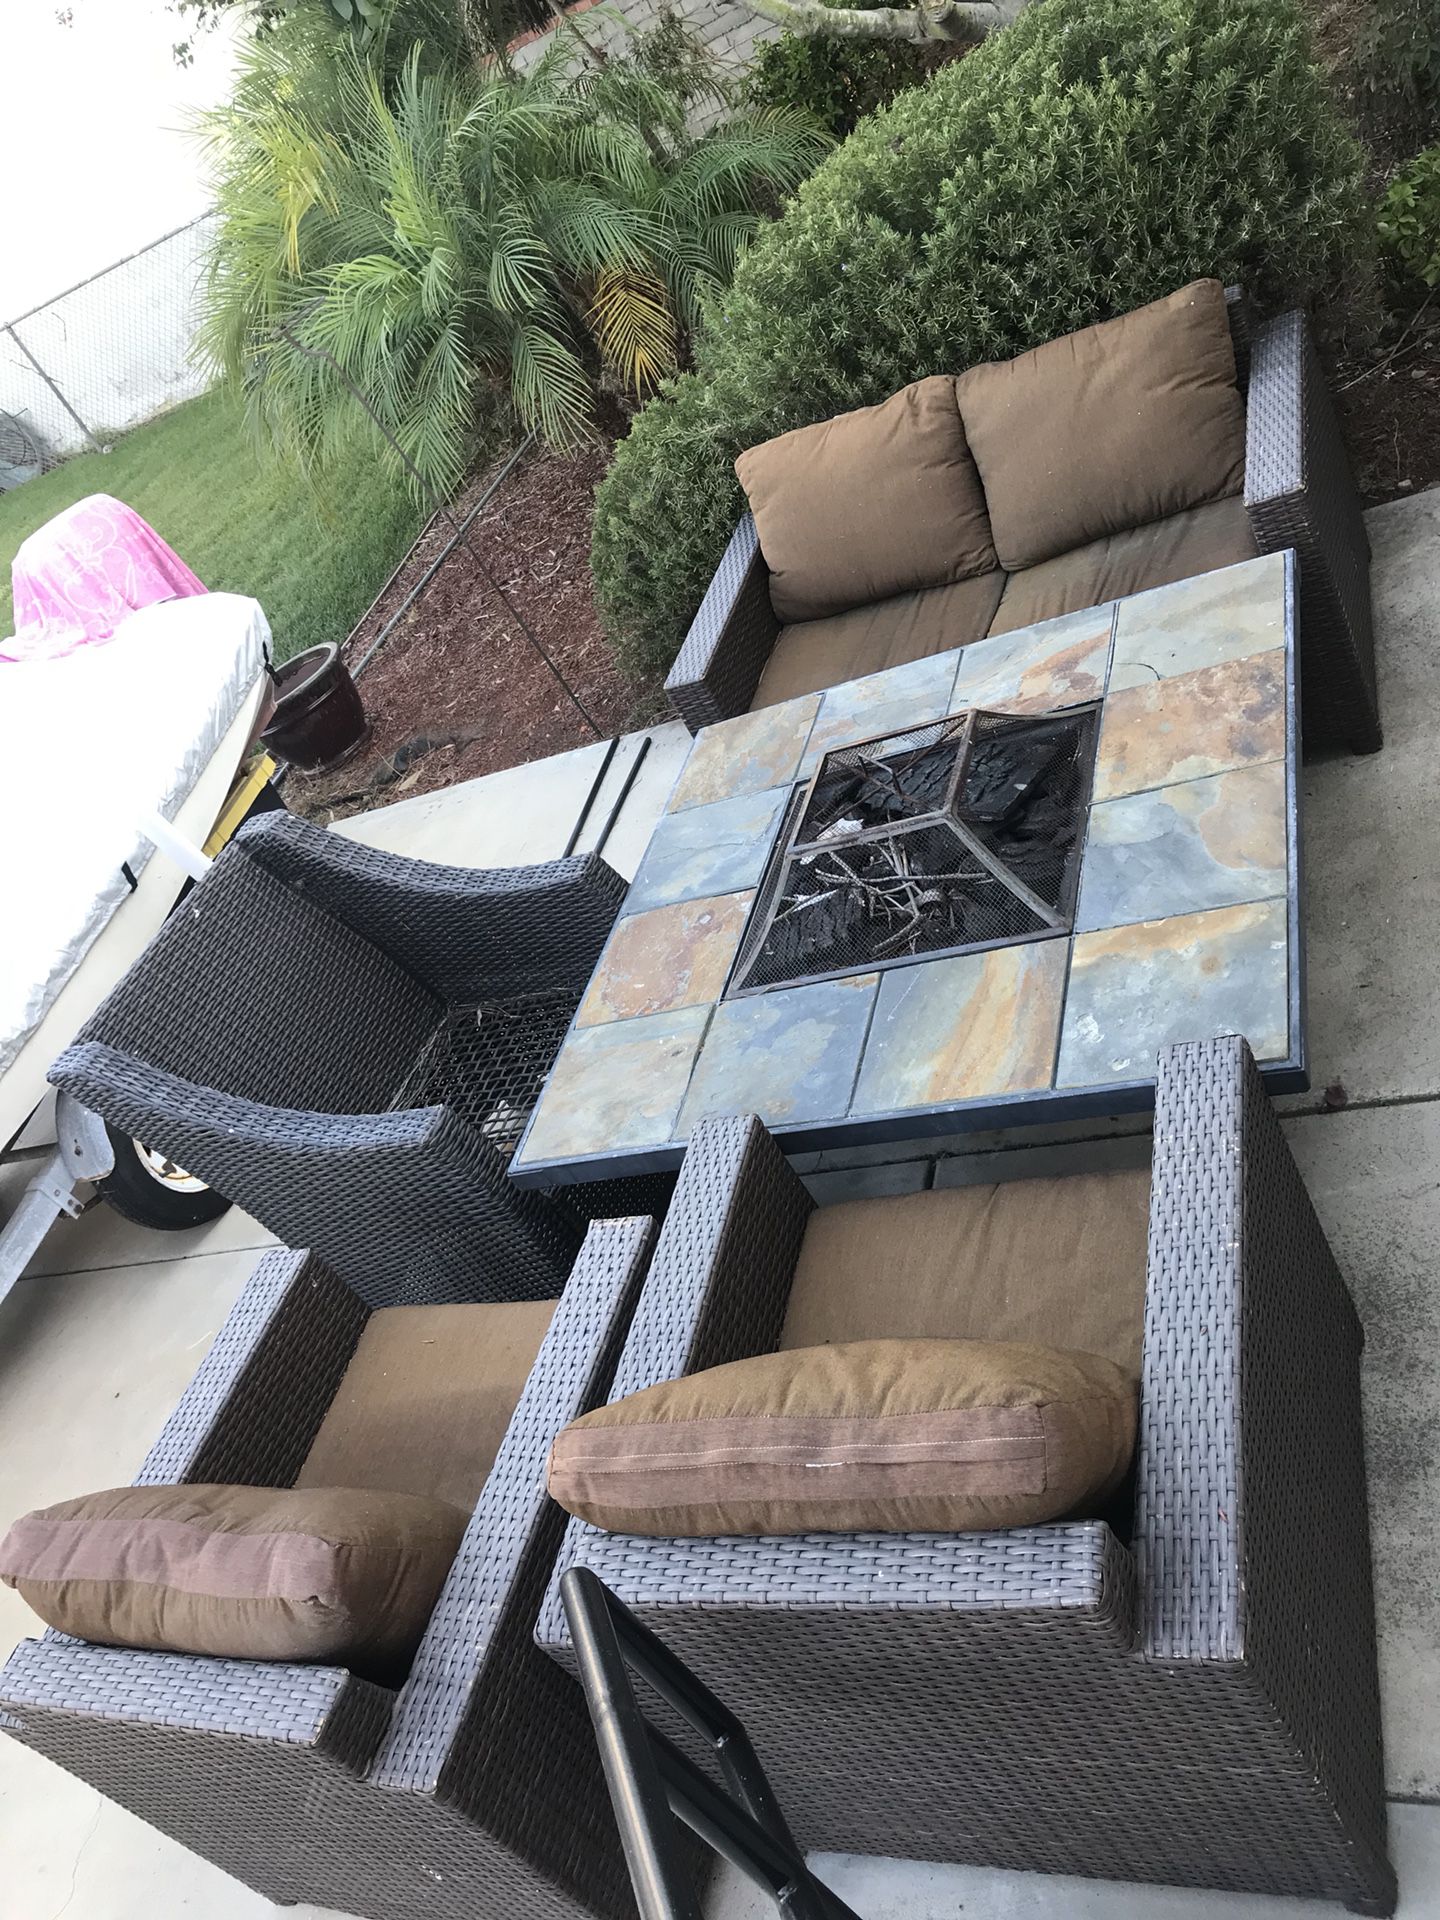 Wicker patio furniture and fire pit